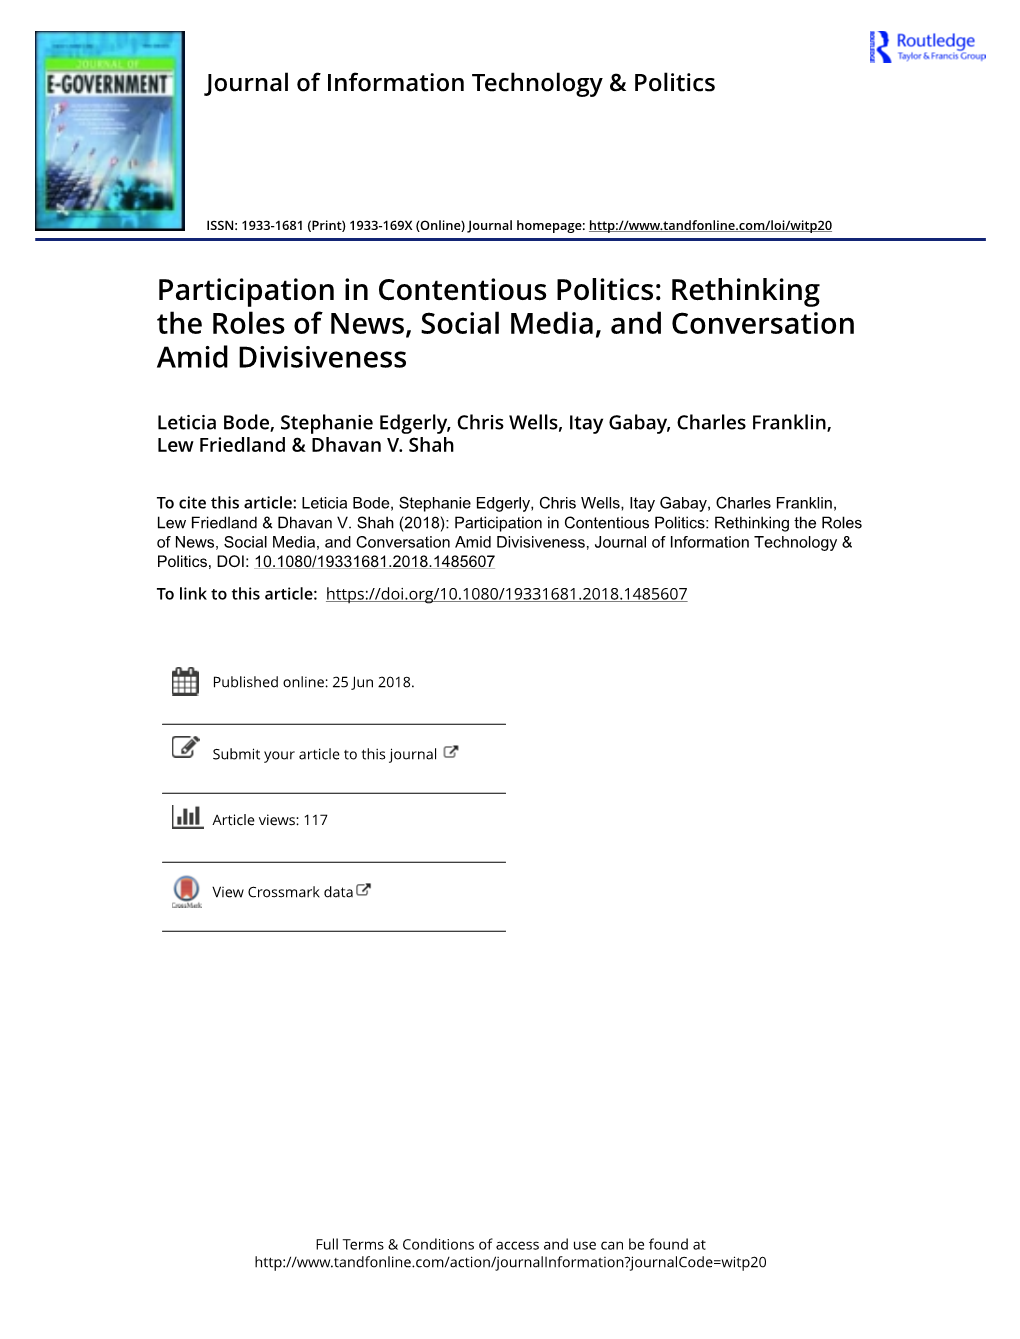 Participation in Contentious Politics: Rethinking the Roles of News, Social Media, and Conversation Amid Divisiveness